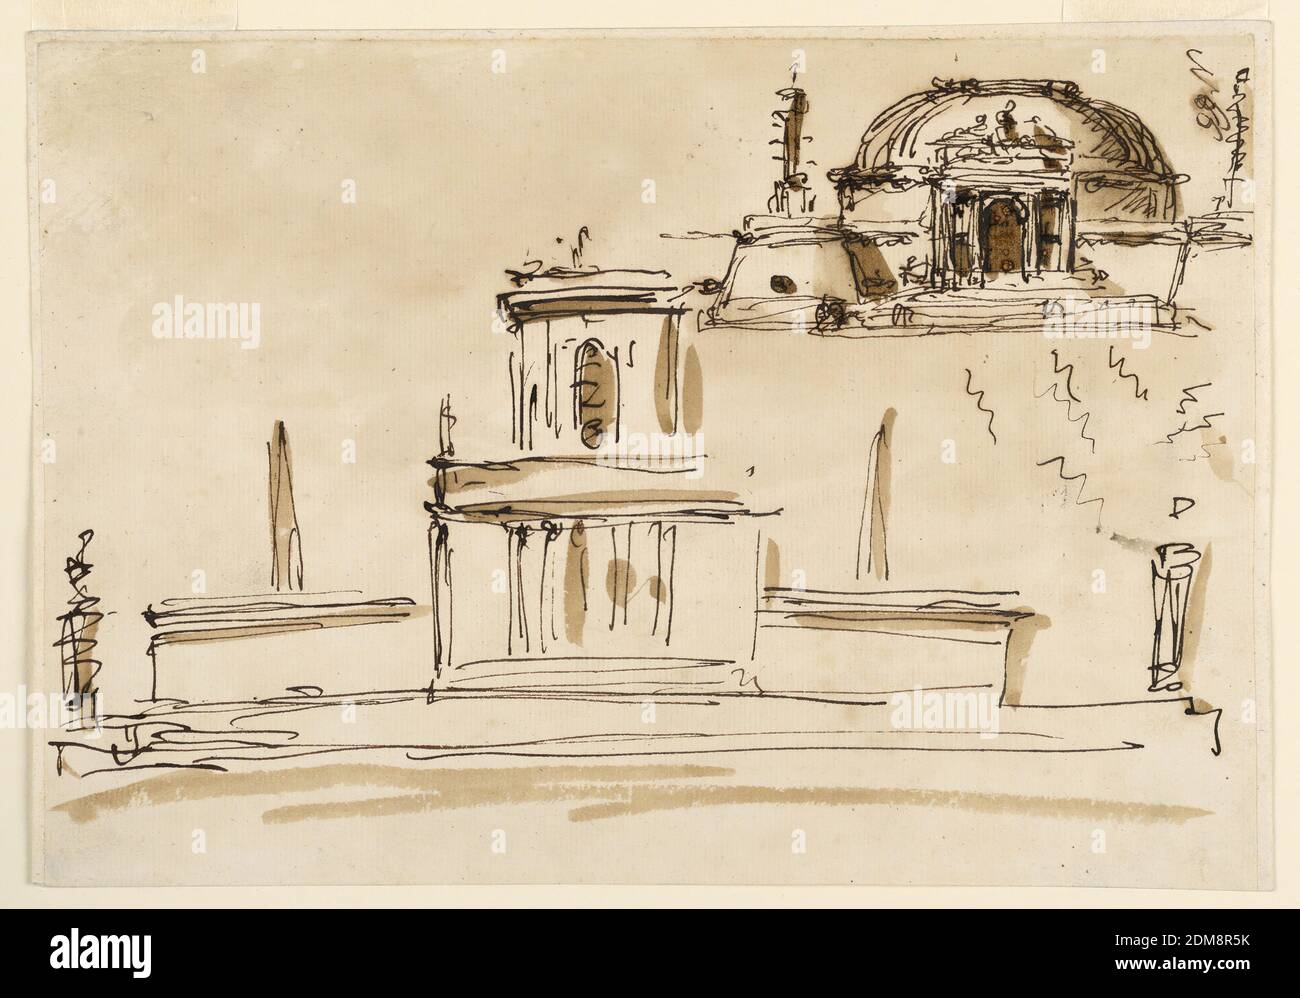 Fountain and a mausoleum, Giuseppe Barberi, Italian, 1746–1809, Pen and brown ink, brush and brown wash on off-white laid paper, lined, Top right: the mausoleum. Steps lead up to the portal of a circular structure wit ha dome. The portal has the shape of a triumphal arch. An urn, flanked by crouching figures, is shown on top. Small conical structures project laterally from the main structure. They are topped by rostral columns. Bottom: the fountain. It consists of a central circular pavilion of two stories which is flanked by basins with springing water. A platform with indistinct motifs Stock Photo